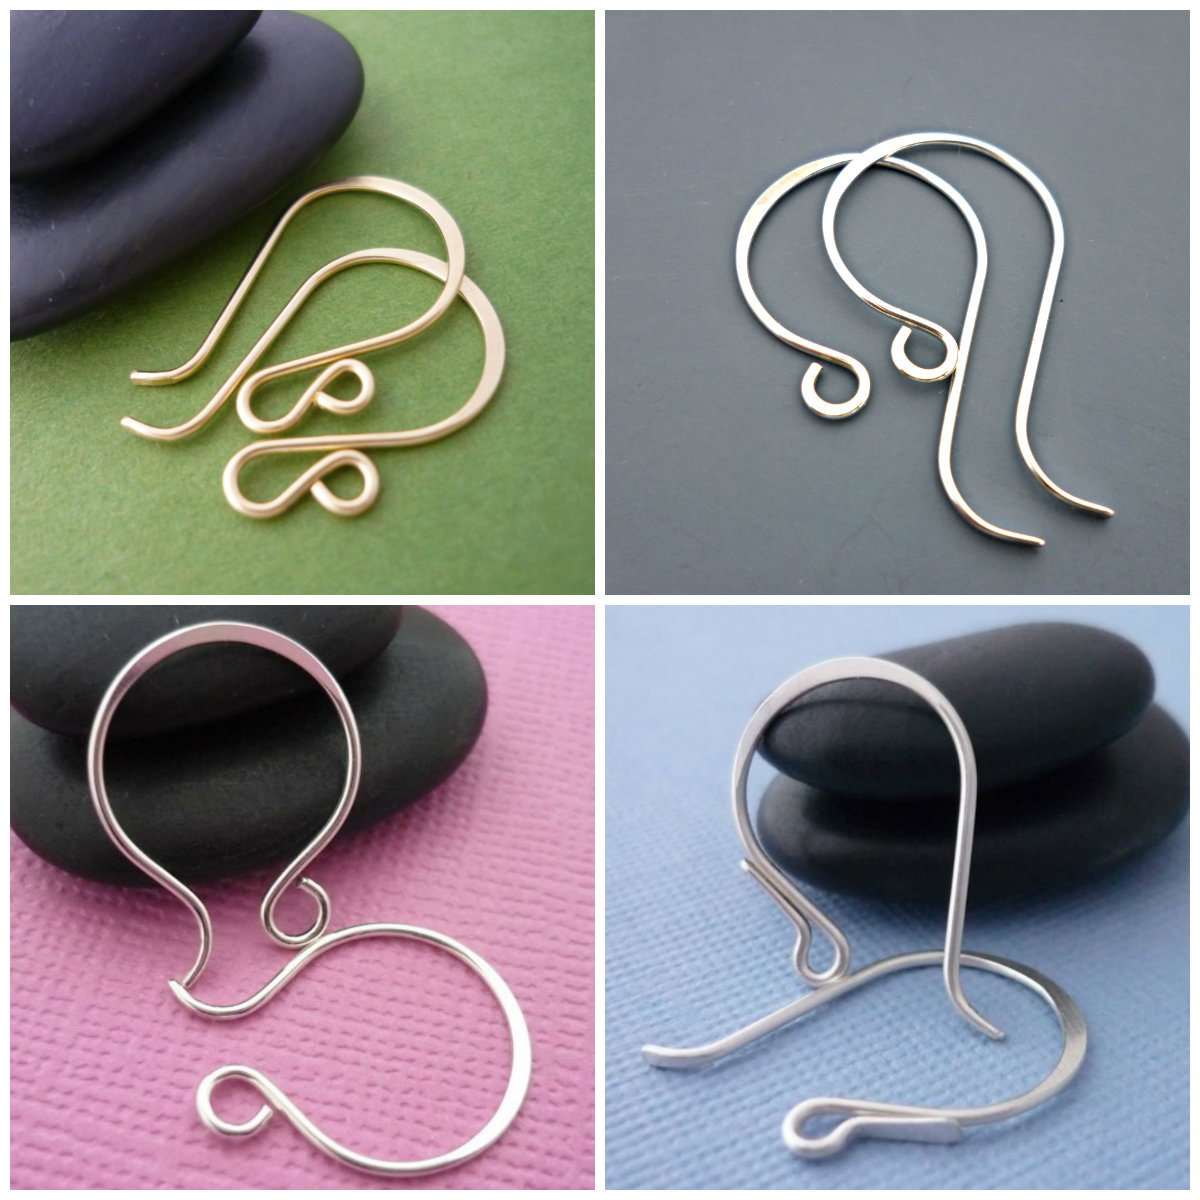 MiShel Designs: Let's Talk Earring Wires,…Shall We?